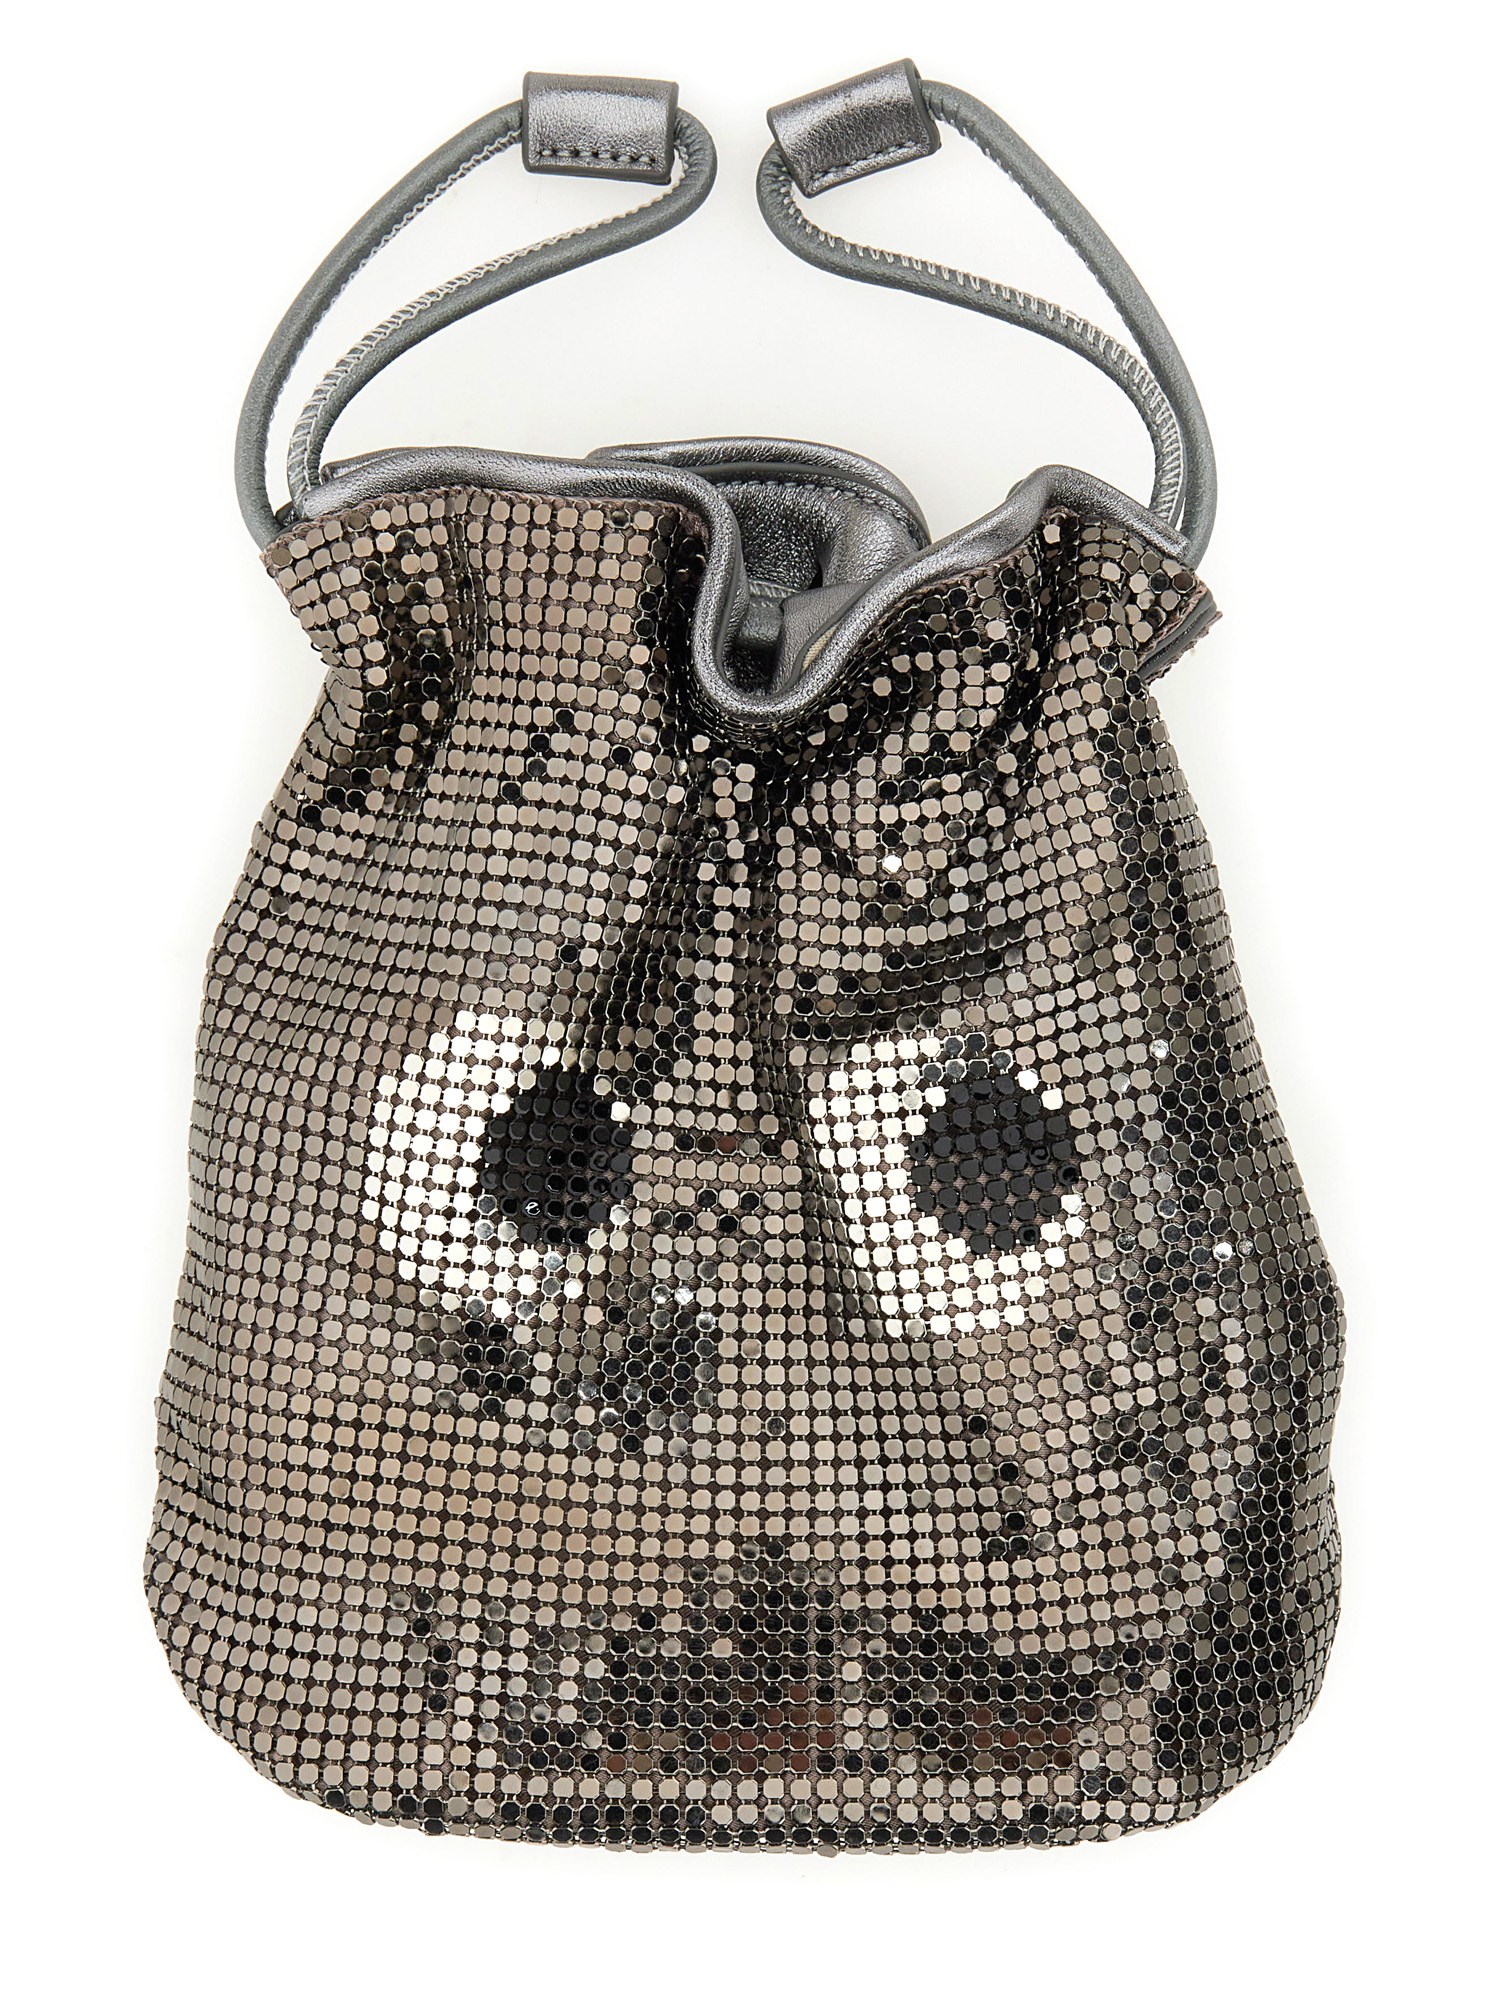 anya hindmarch pouch in mesh